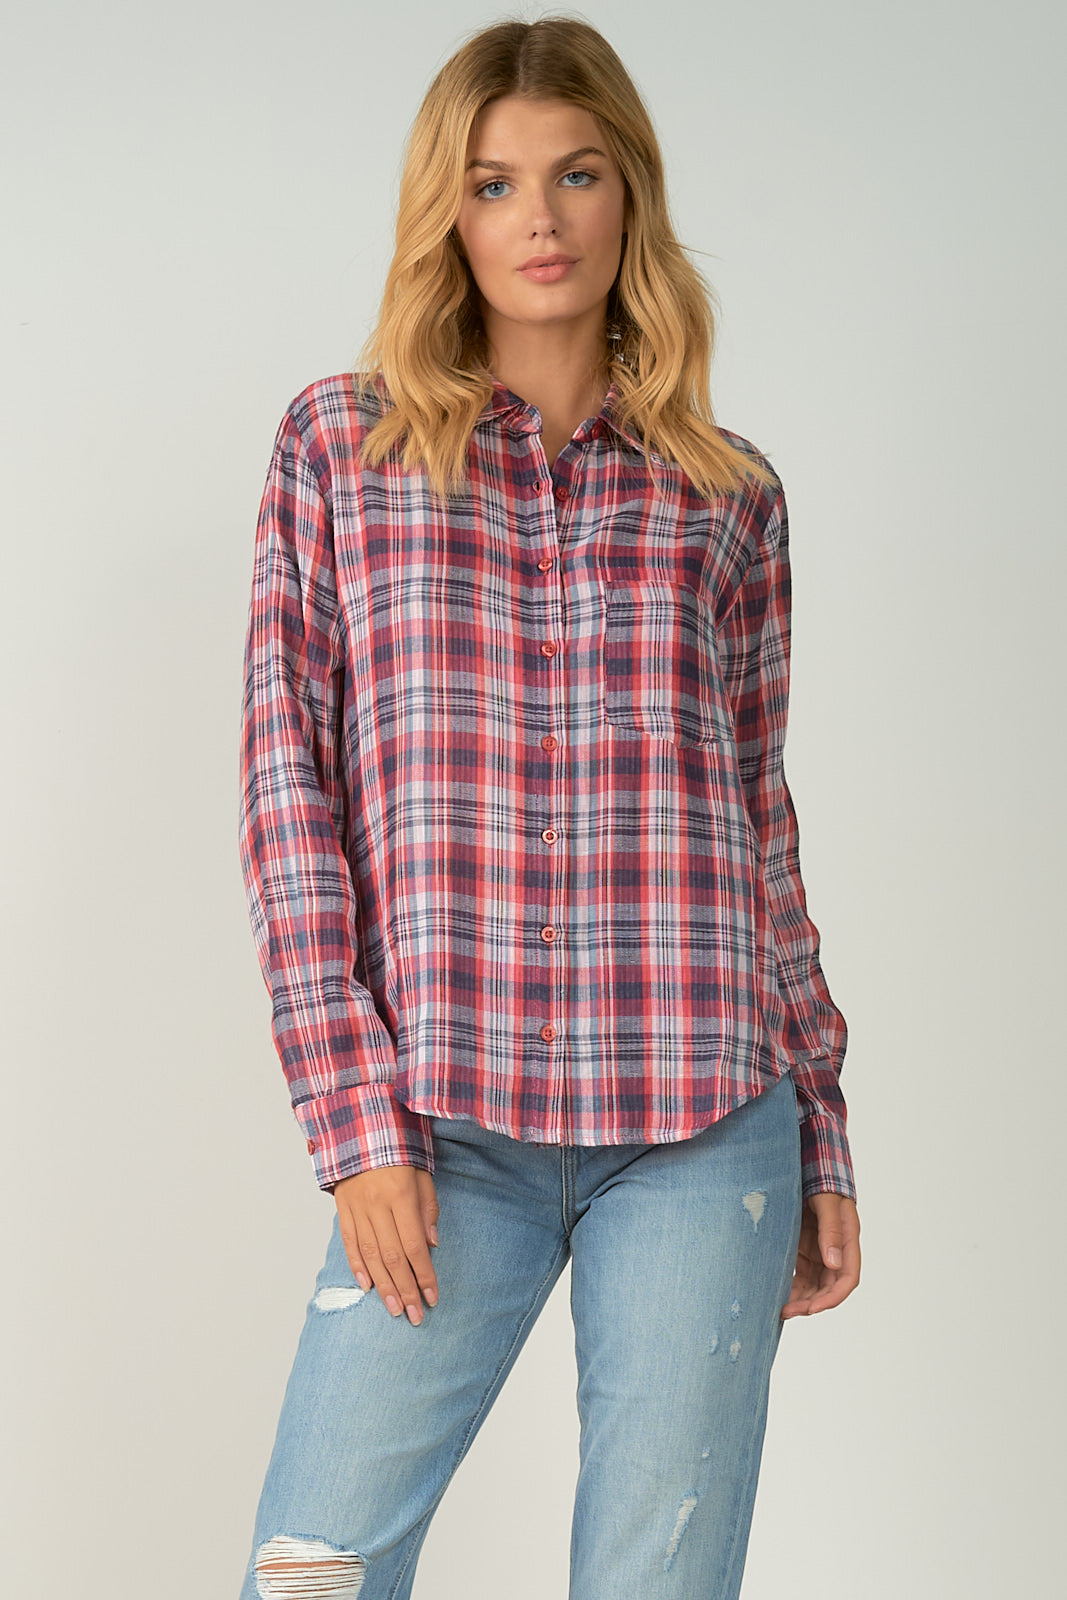 PINK PLAID BUTTON DOWN TOP - Kingfisher Road - Online Boutique